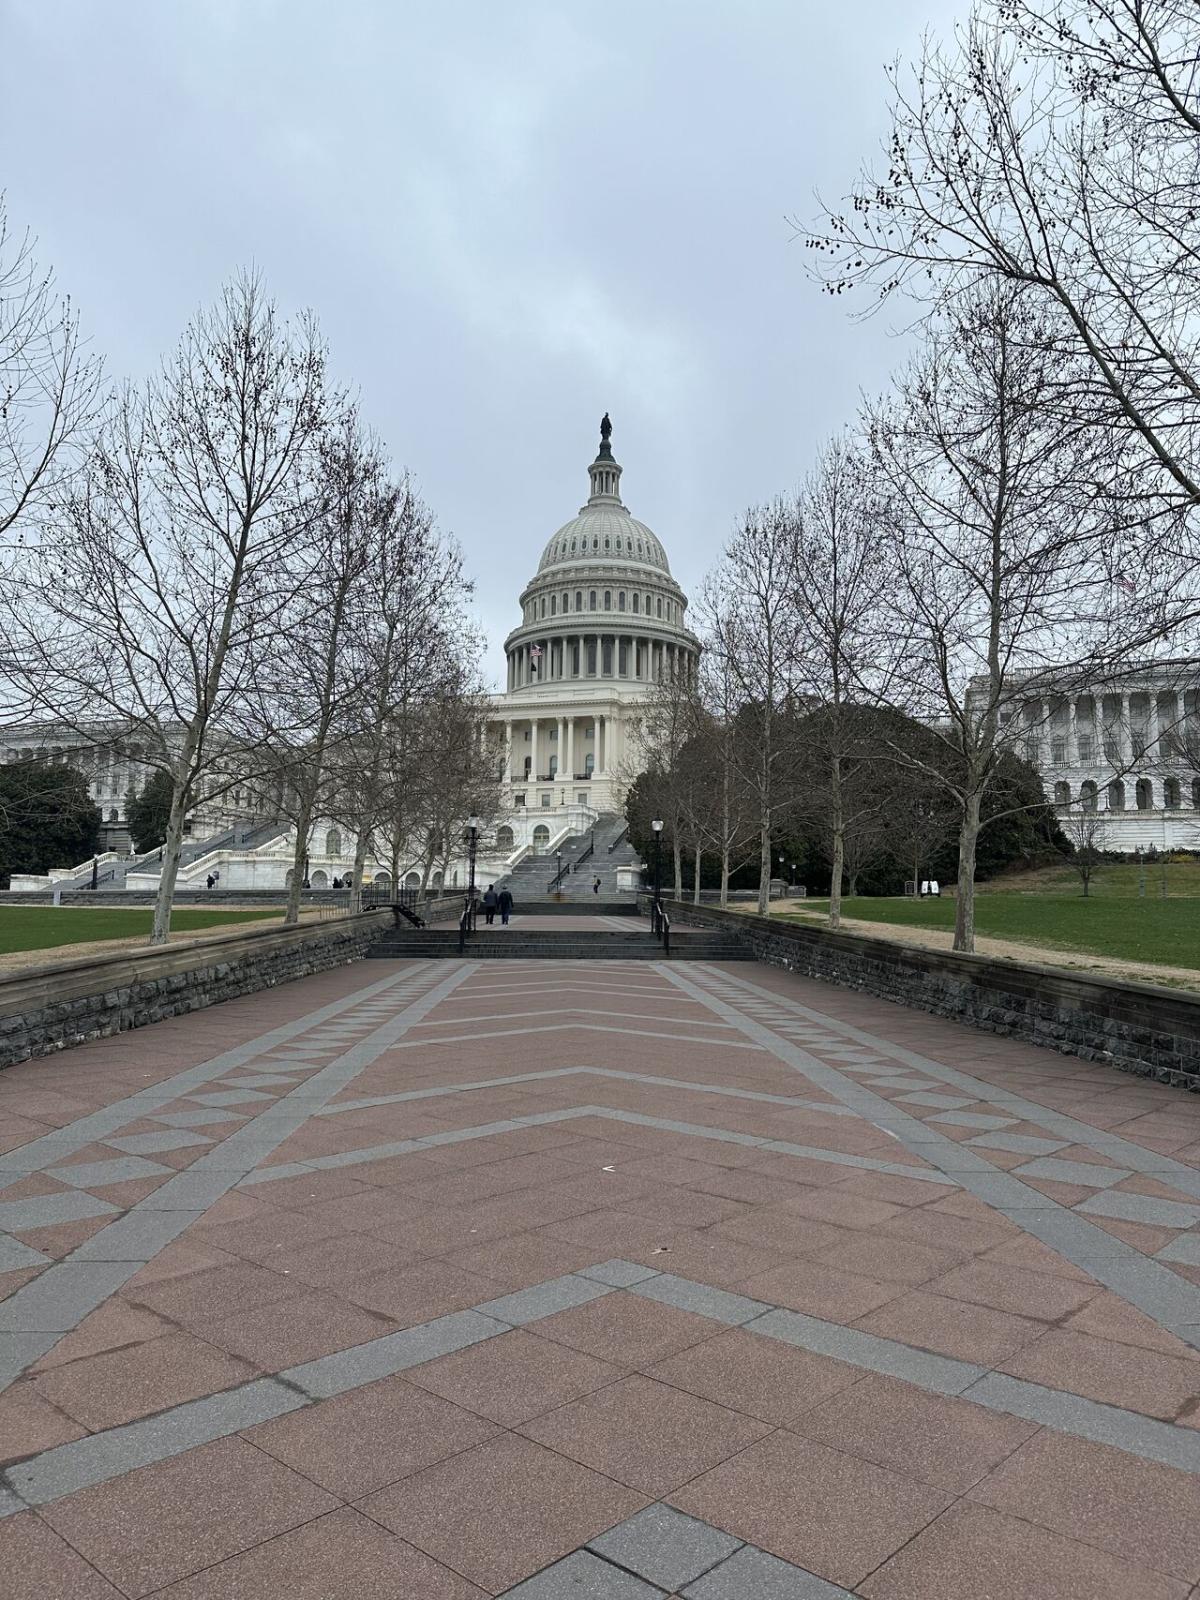 Capital building and a long walk way in front.